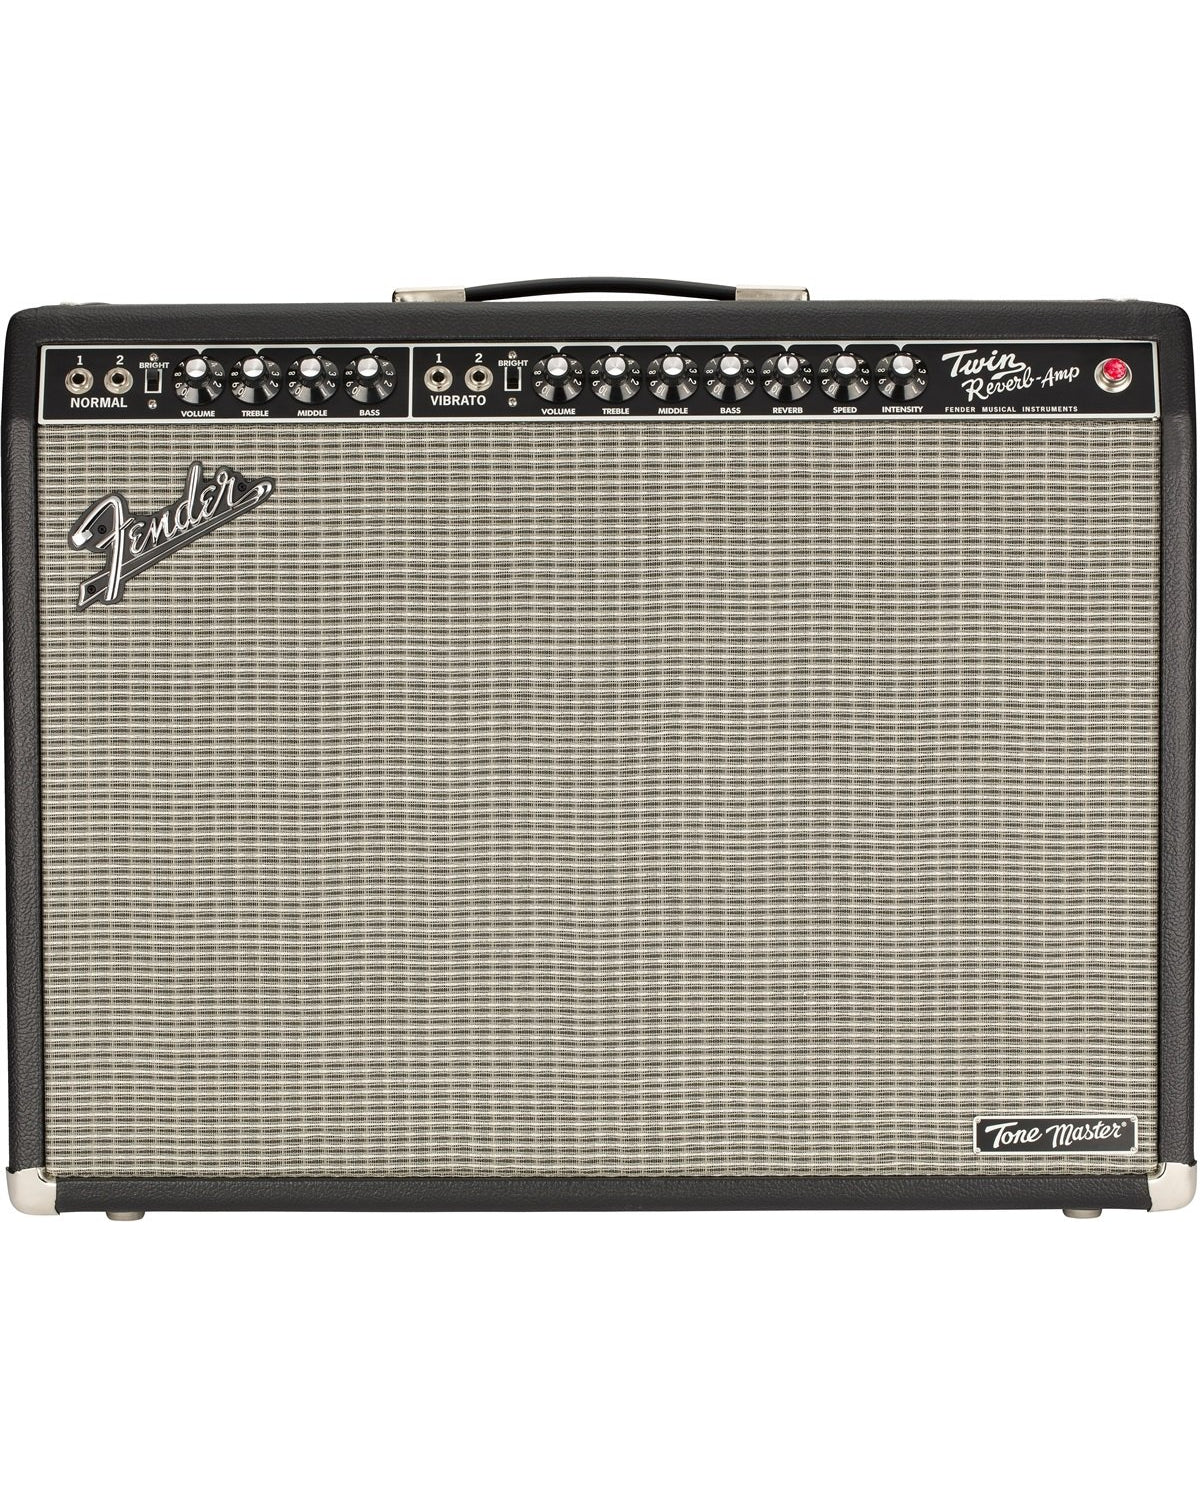 Front of Fender Tone Master Twin Reverb